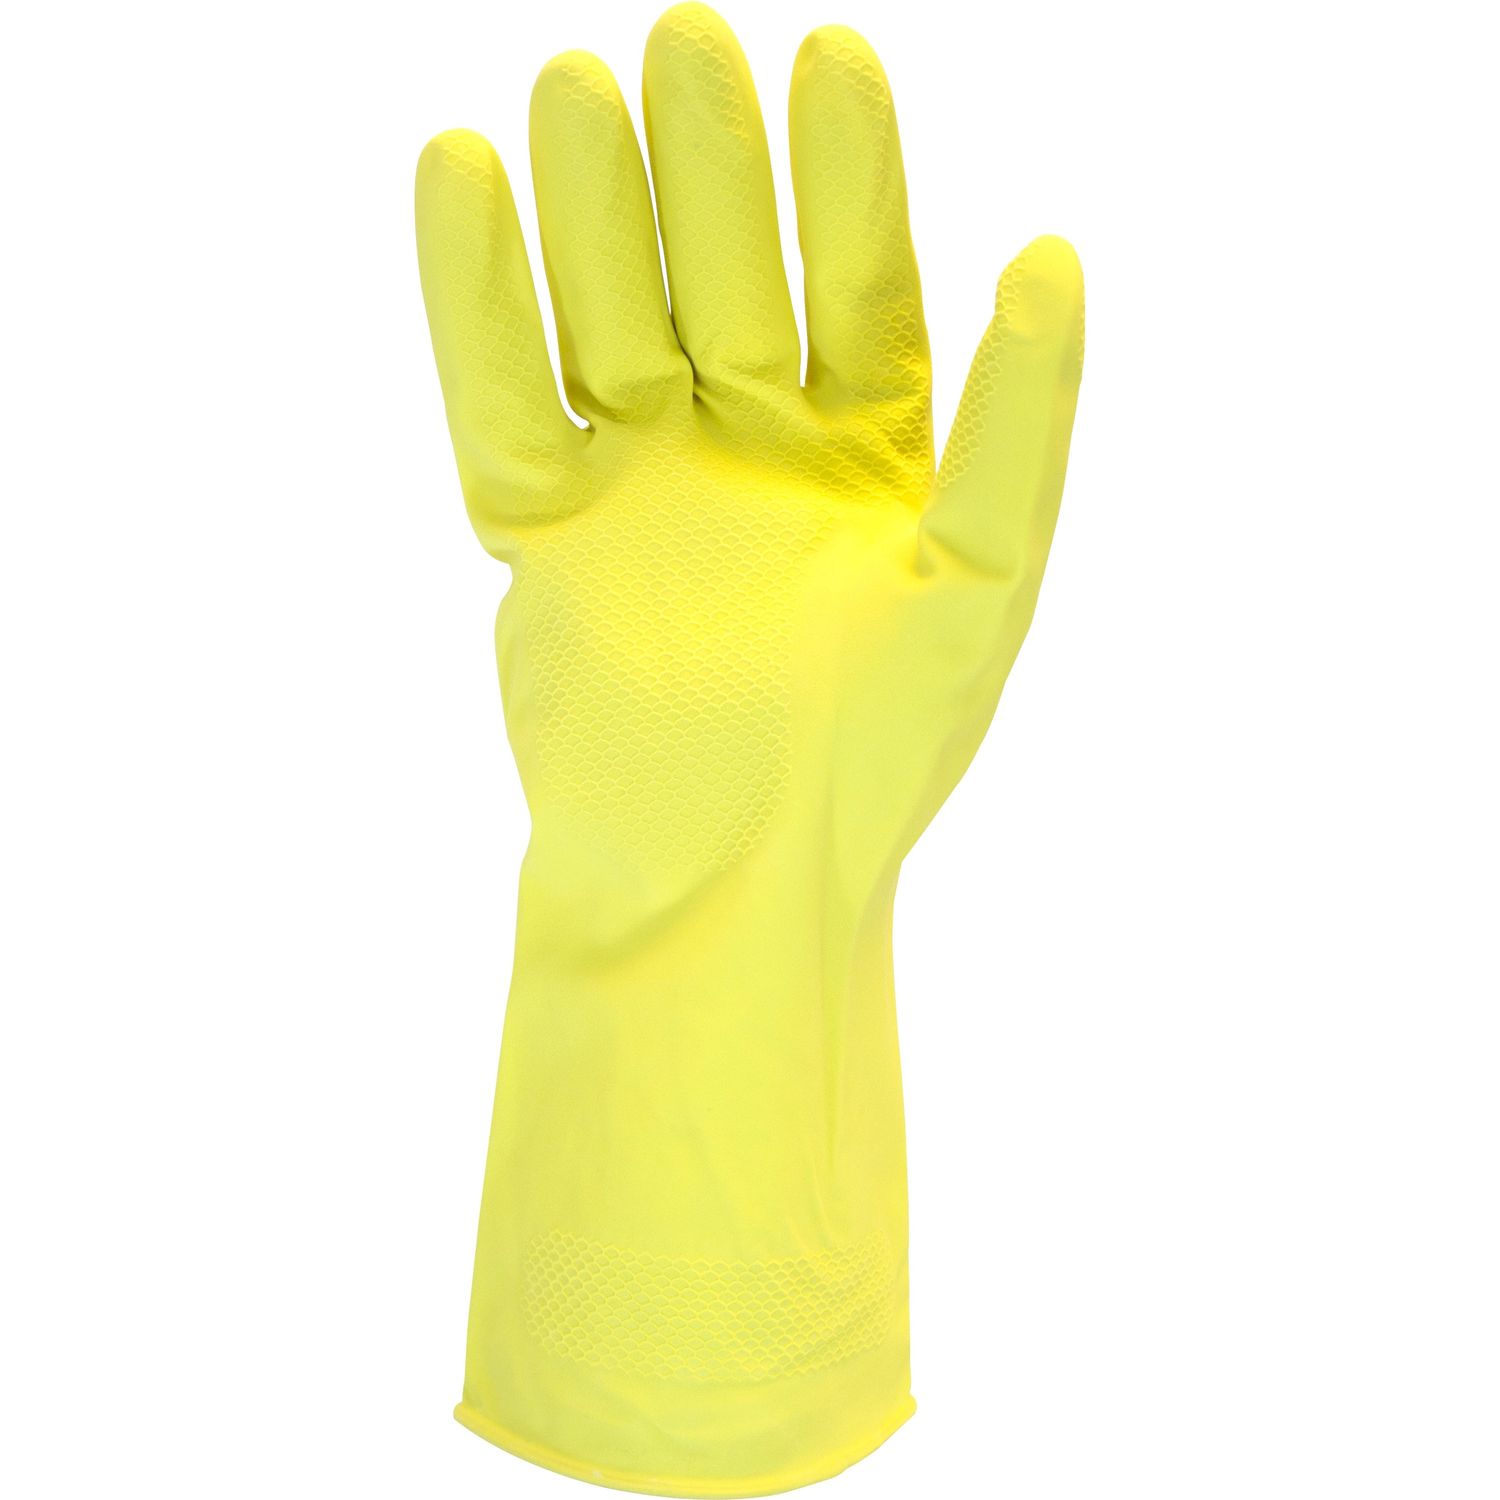 Yellow Flock Lined Latex Gloves Chemical Protection, Large Size, Latex, Yellow, Pinked Cuff, Fish Scale Grip, Flock-lined, For Dishwashing, Cleaning, Meat Processing, 18 mil Thickness